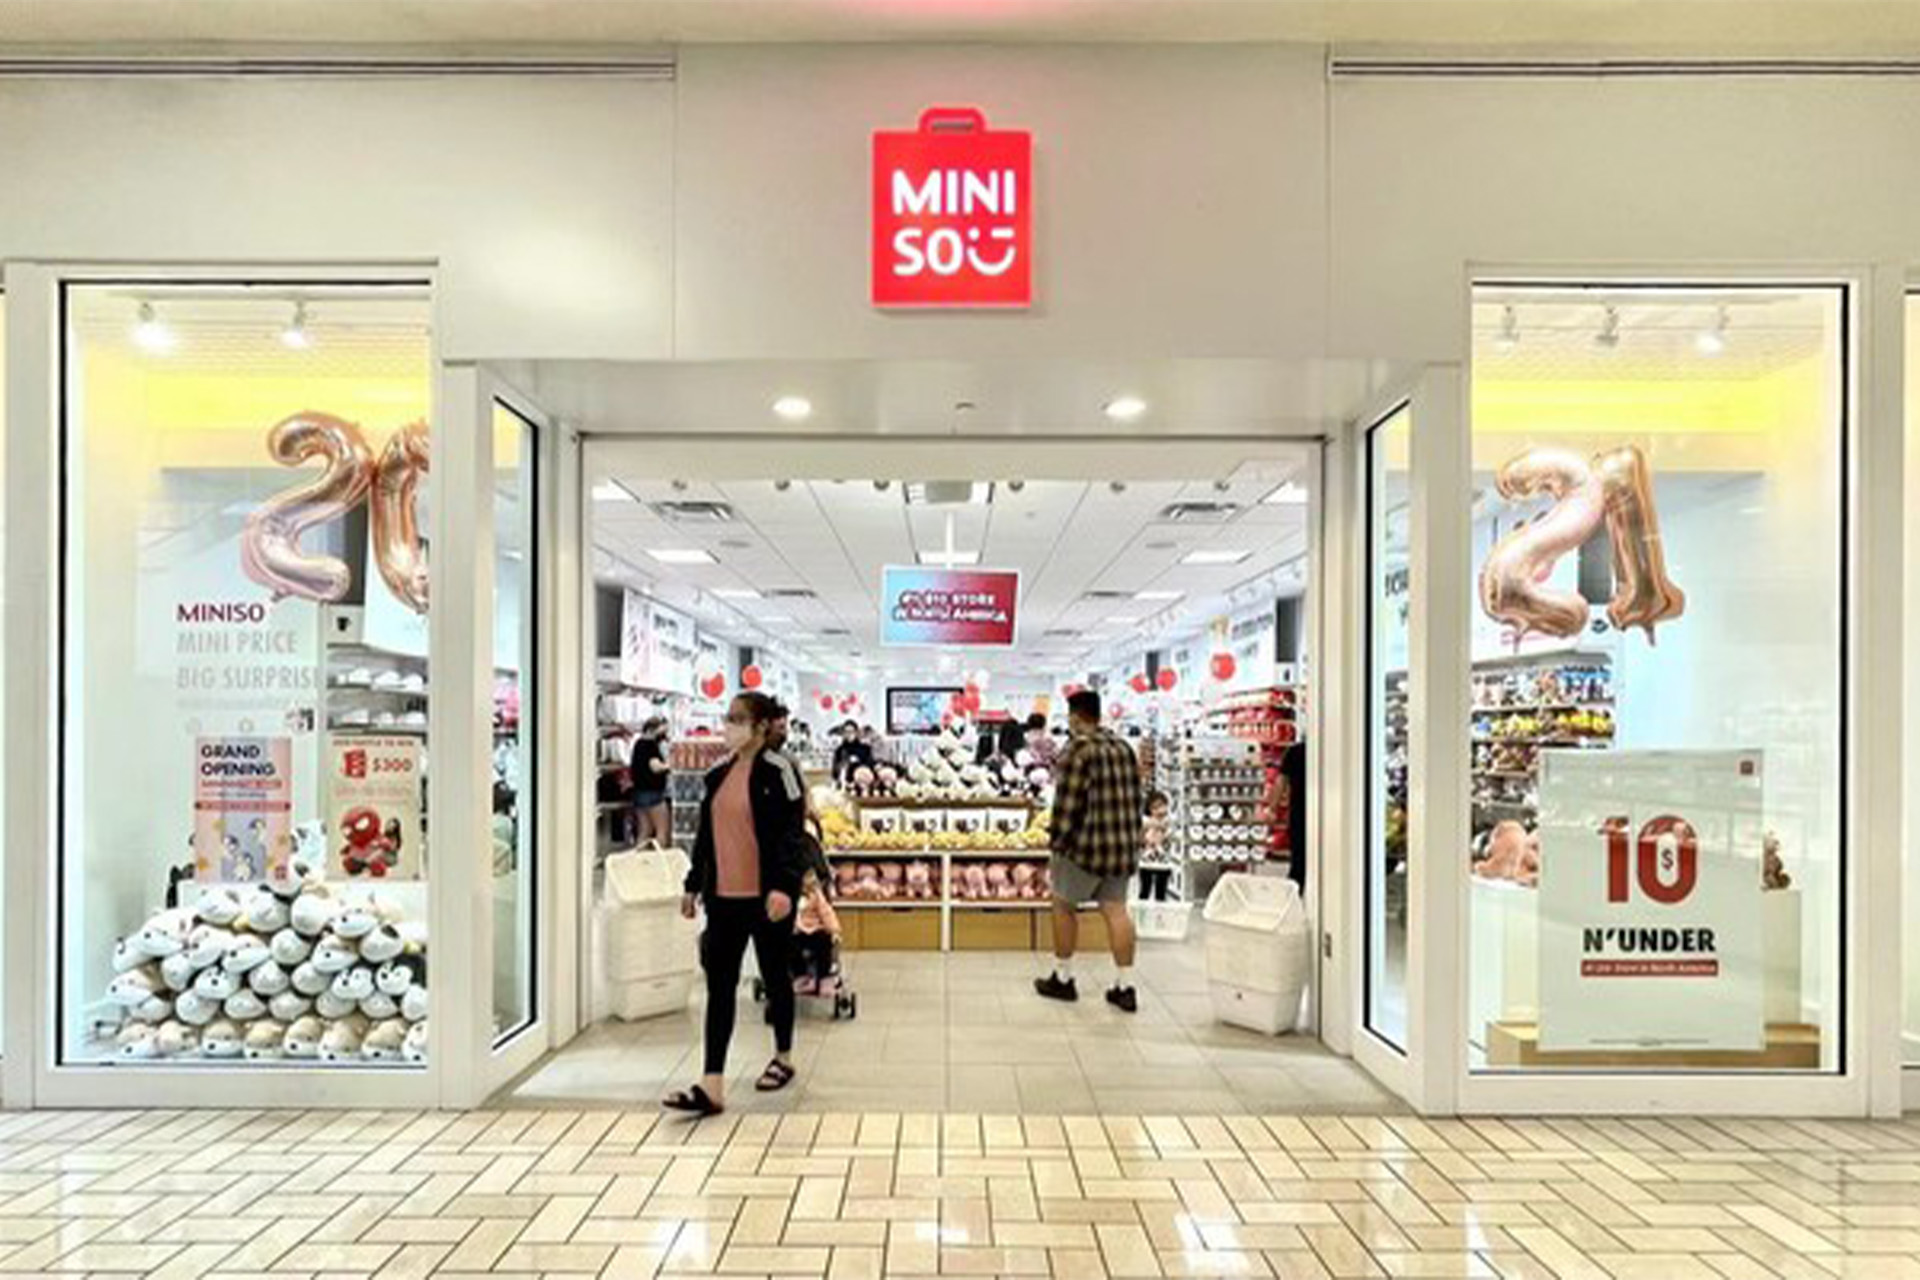 The expansion plan of MINISO is outdated?